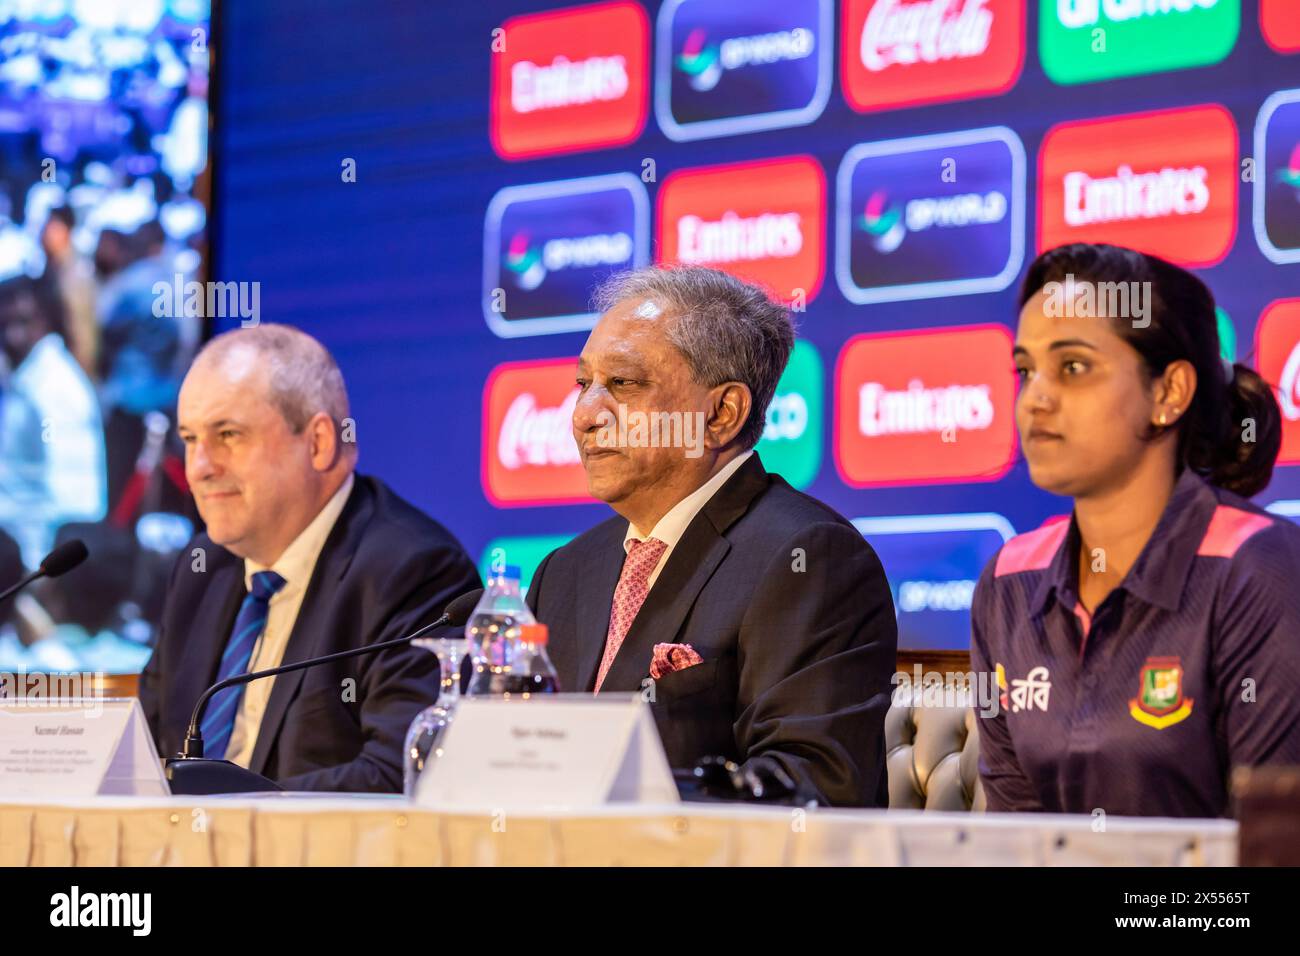 L-R ICC CEO Geoff Allardice, Minister for Youth & Sports and BCB President, Nazmul Hassan, and Women's Team Captain of Bangladesh, Nigar Sultana Joty seen during a press conference held at the Pan Pacific Sonargaon, Dhaka. The 2024 ICC Women's T20 World Cup is scheduled to be the ninth edition of ICC Women's T20 World Cup tournament. It is scheduled to be hosted in Bangladesh from 3 to 20 October 2024. Australia are the defending champions having defeated South Africa in final of the previous edition. Stock Photo